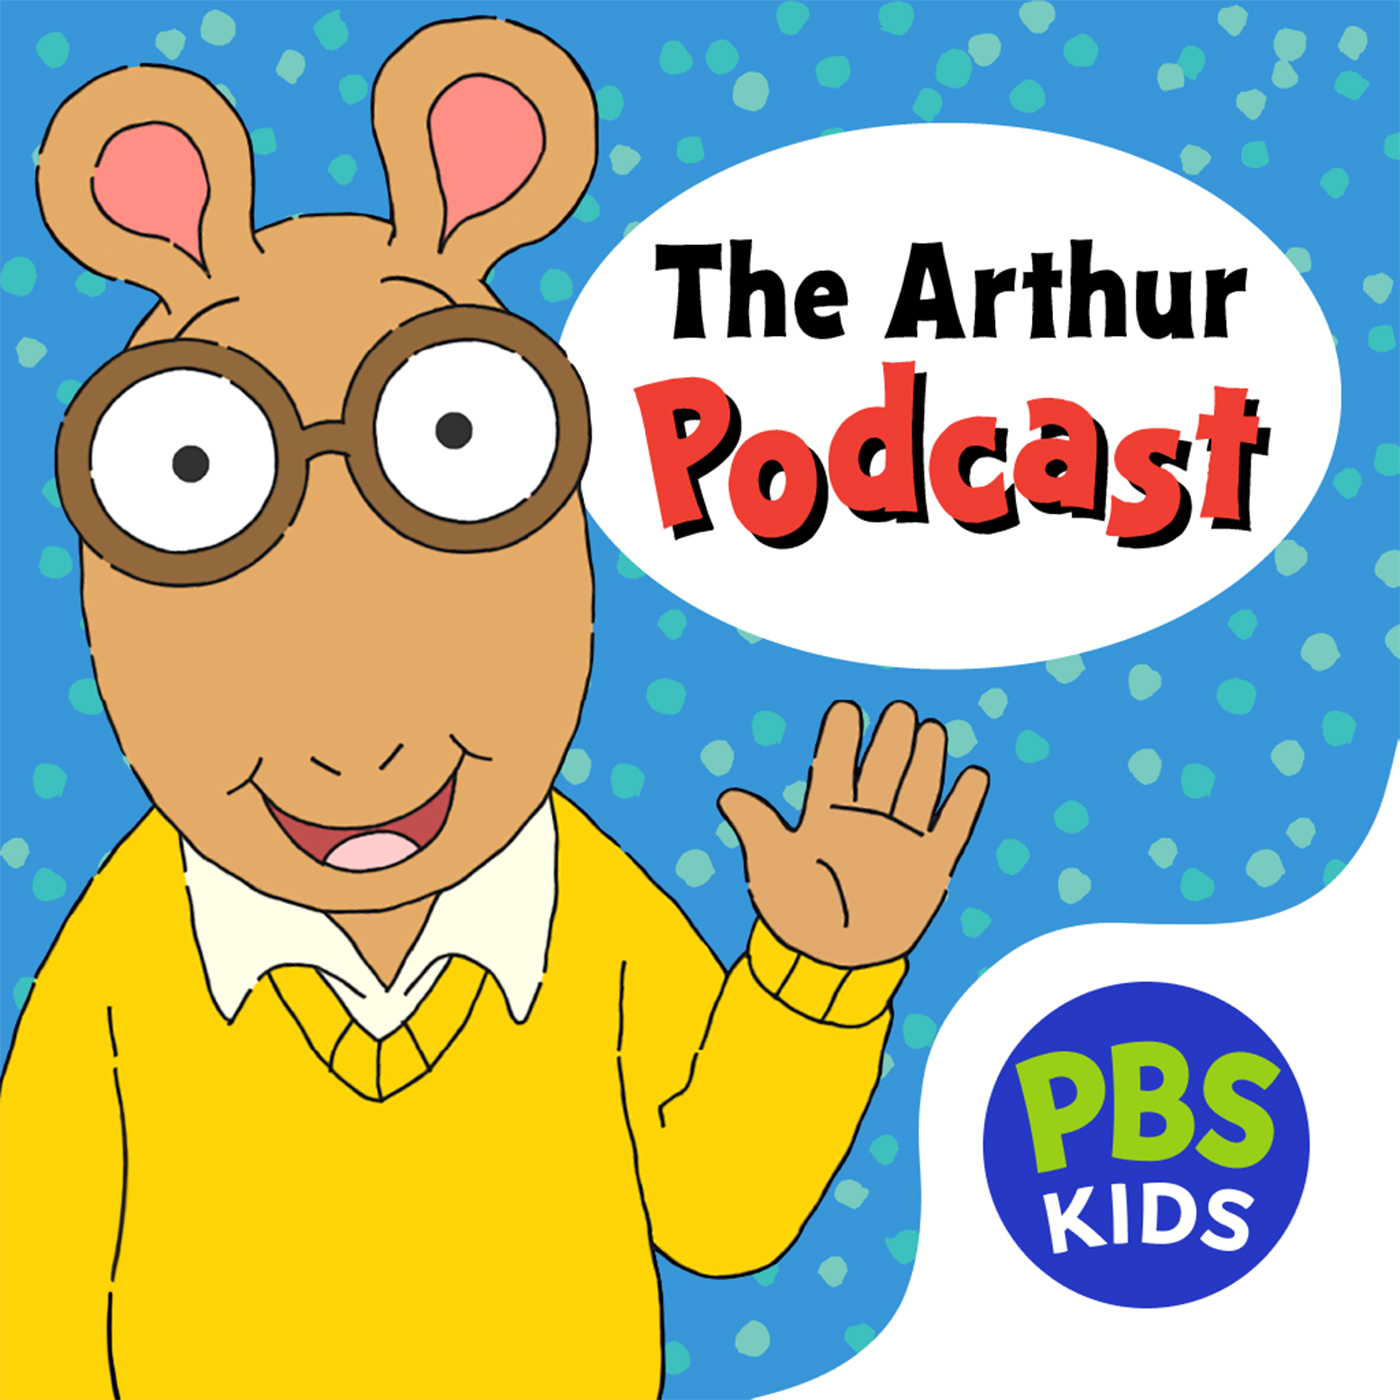 Podcast episode image for Announcing Season 2 of The Arthur Podcast!